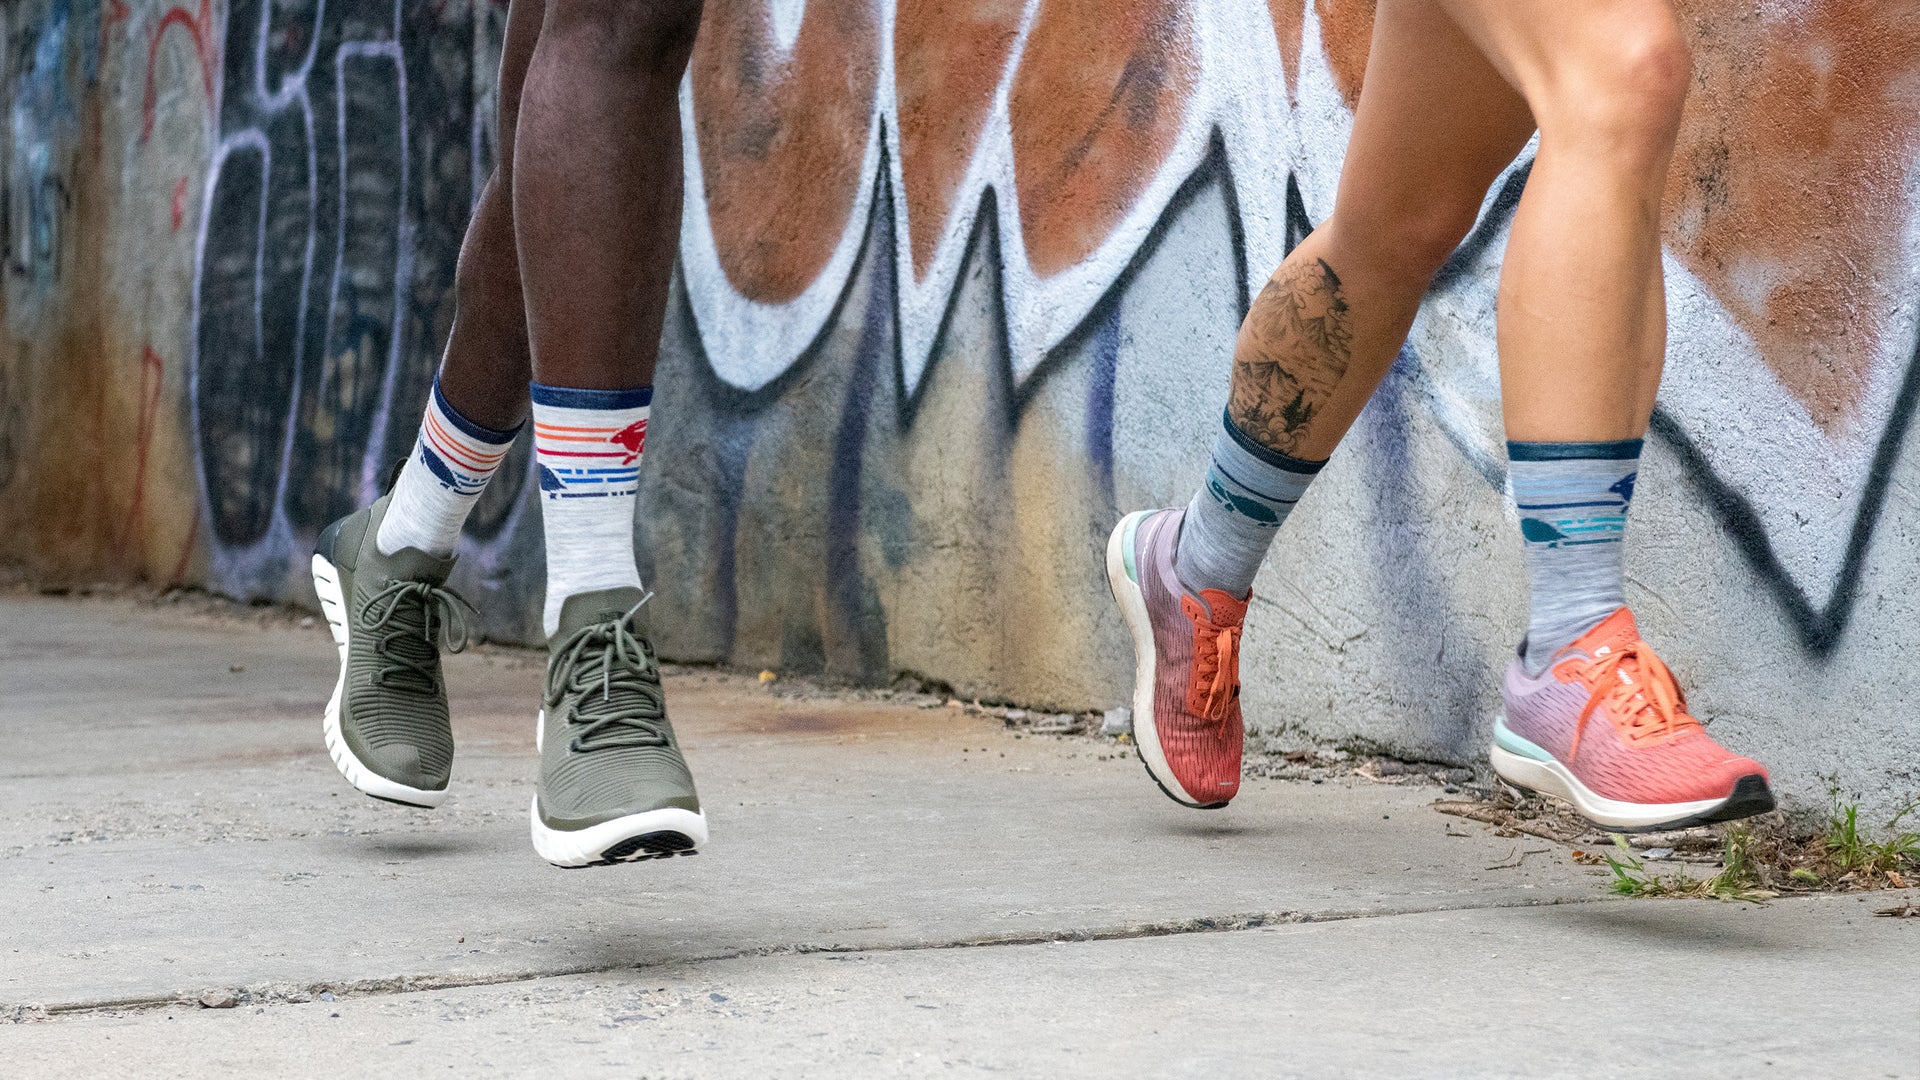 Our running socks wick away moisture and protect your feet from blisters.  Try a pair today